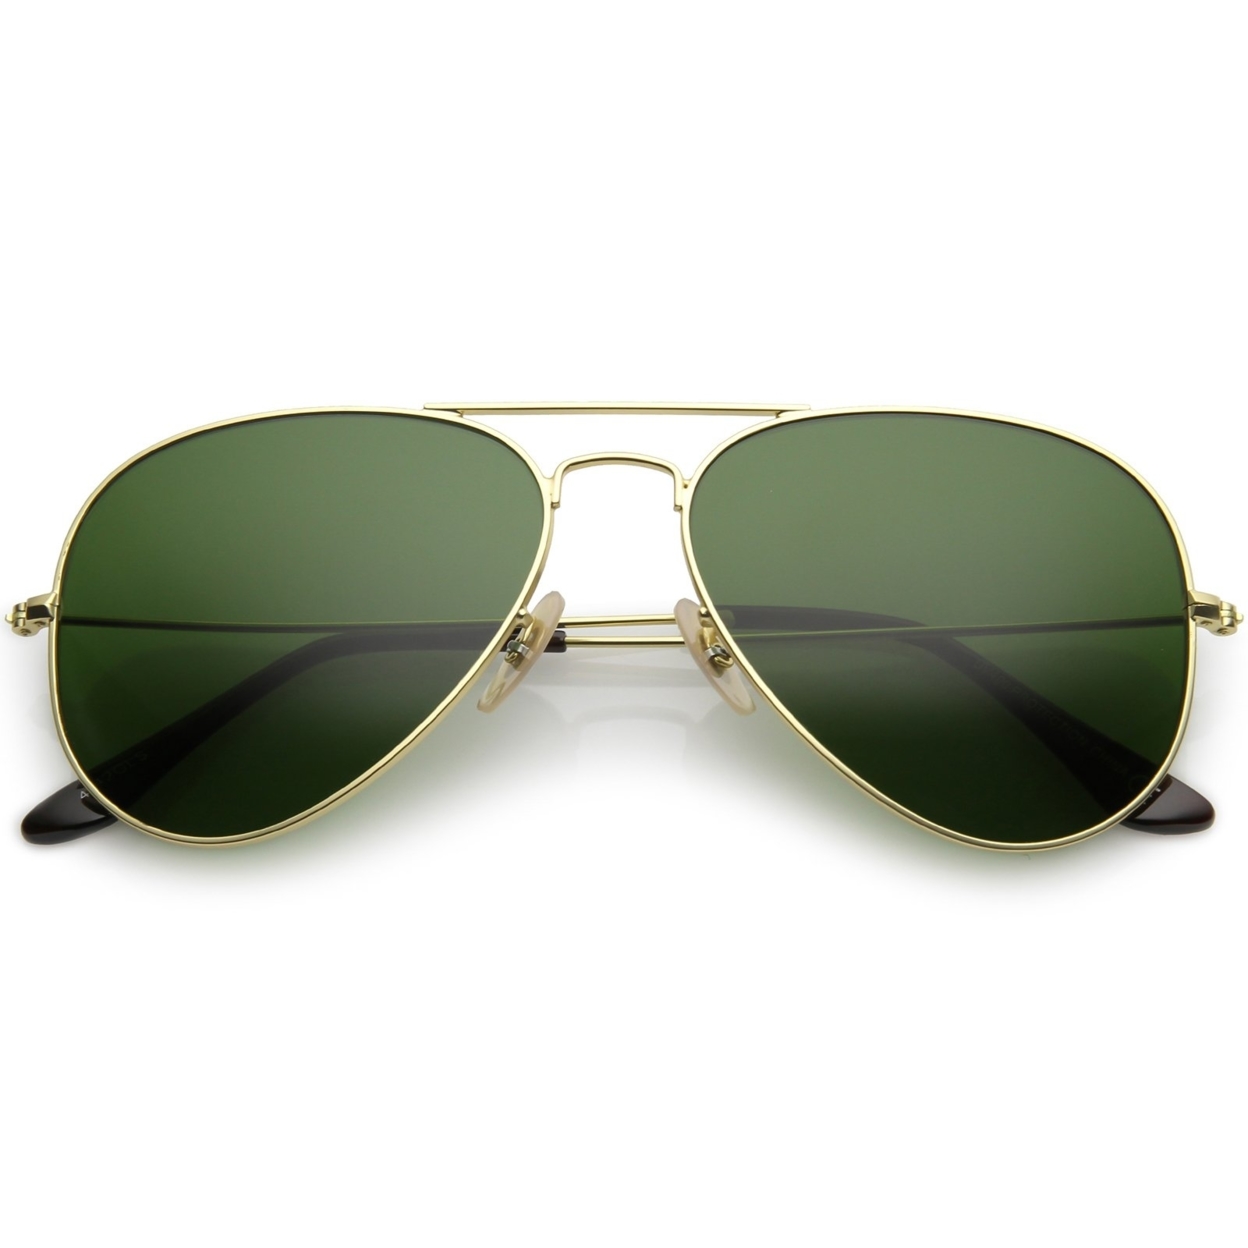 Premium Small Classic Matte Metal Aviator Sunglasses With Green Tinted Glass Lens 57mm - Gold / Green